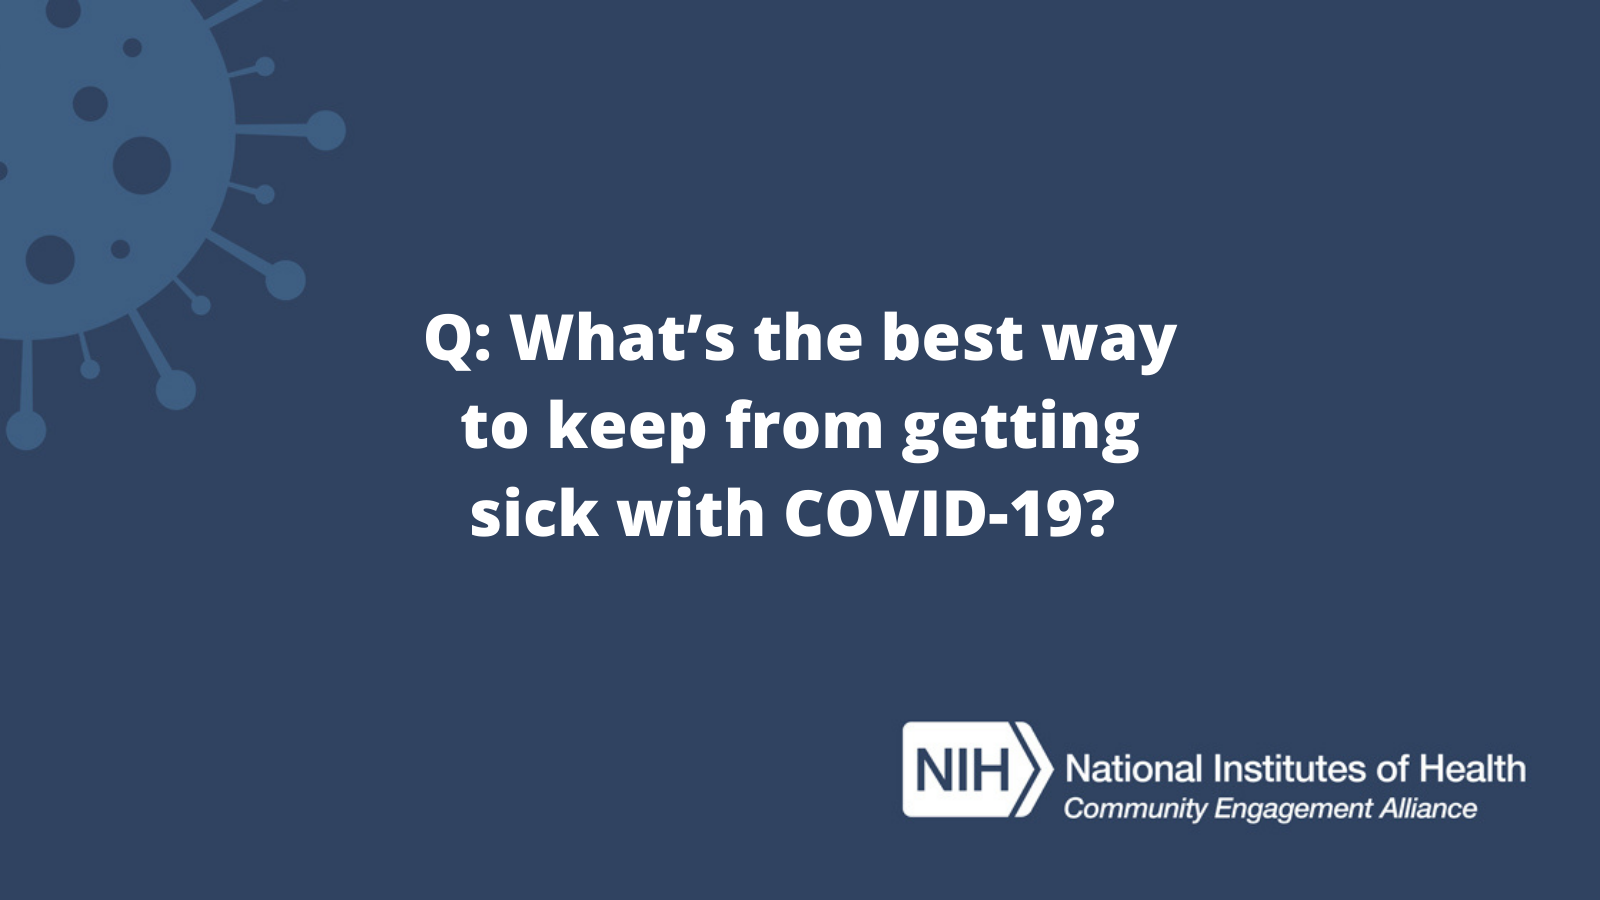 Q: What's the best way to keep from getting sick with COVID-19?